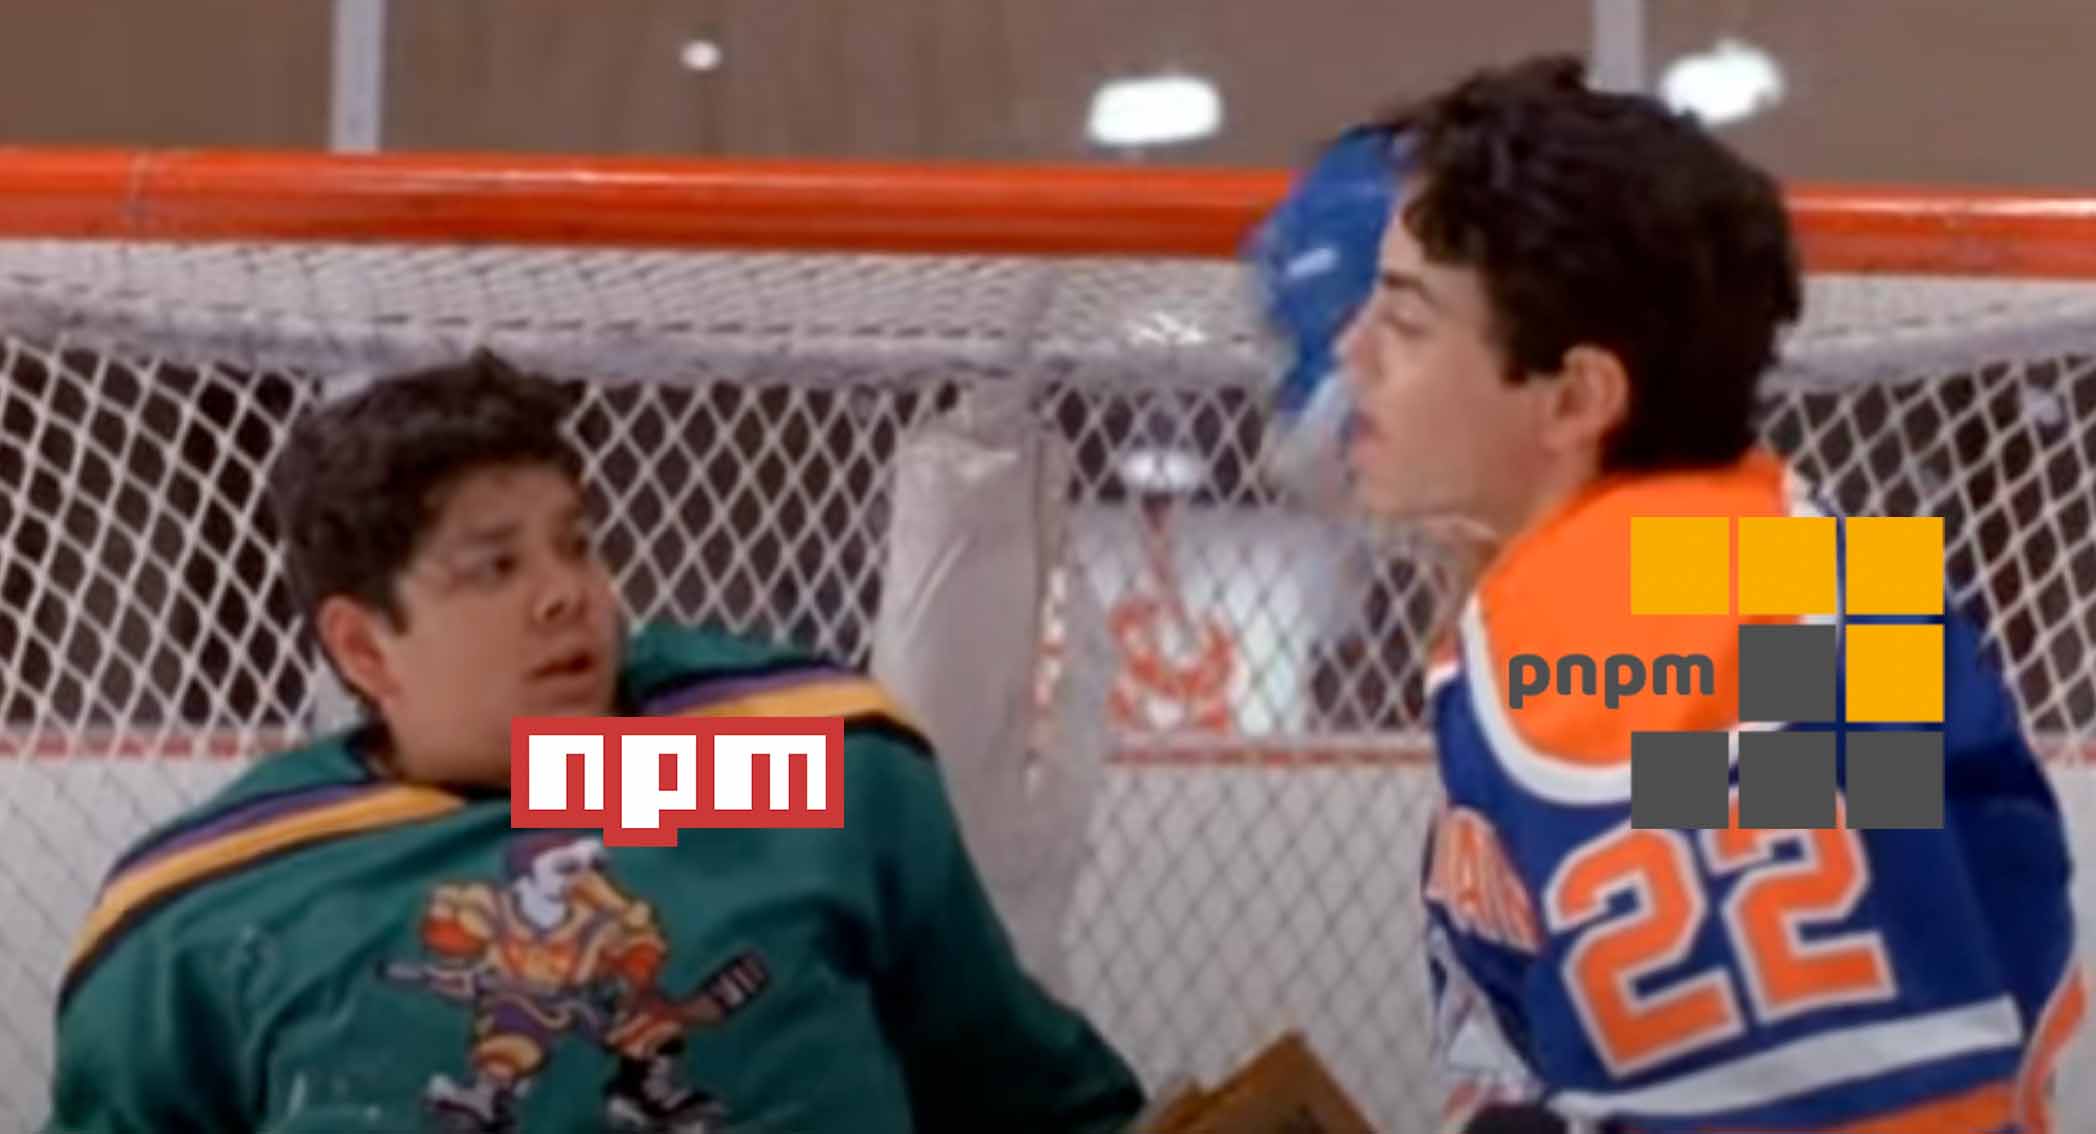 Mighty ducks screenshot with pnpm and npm logos